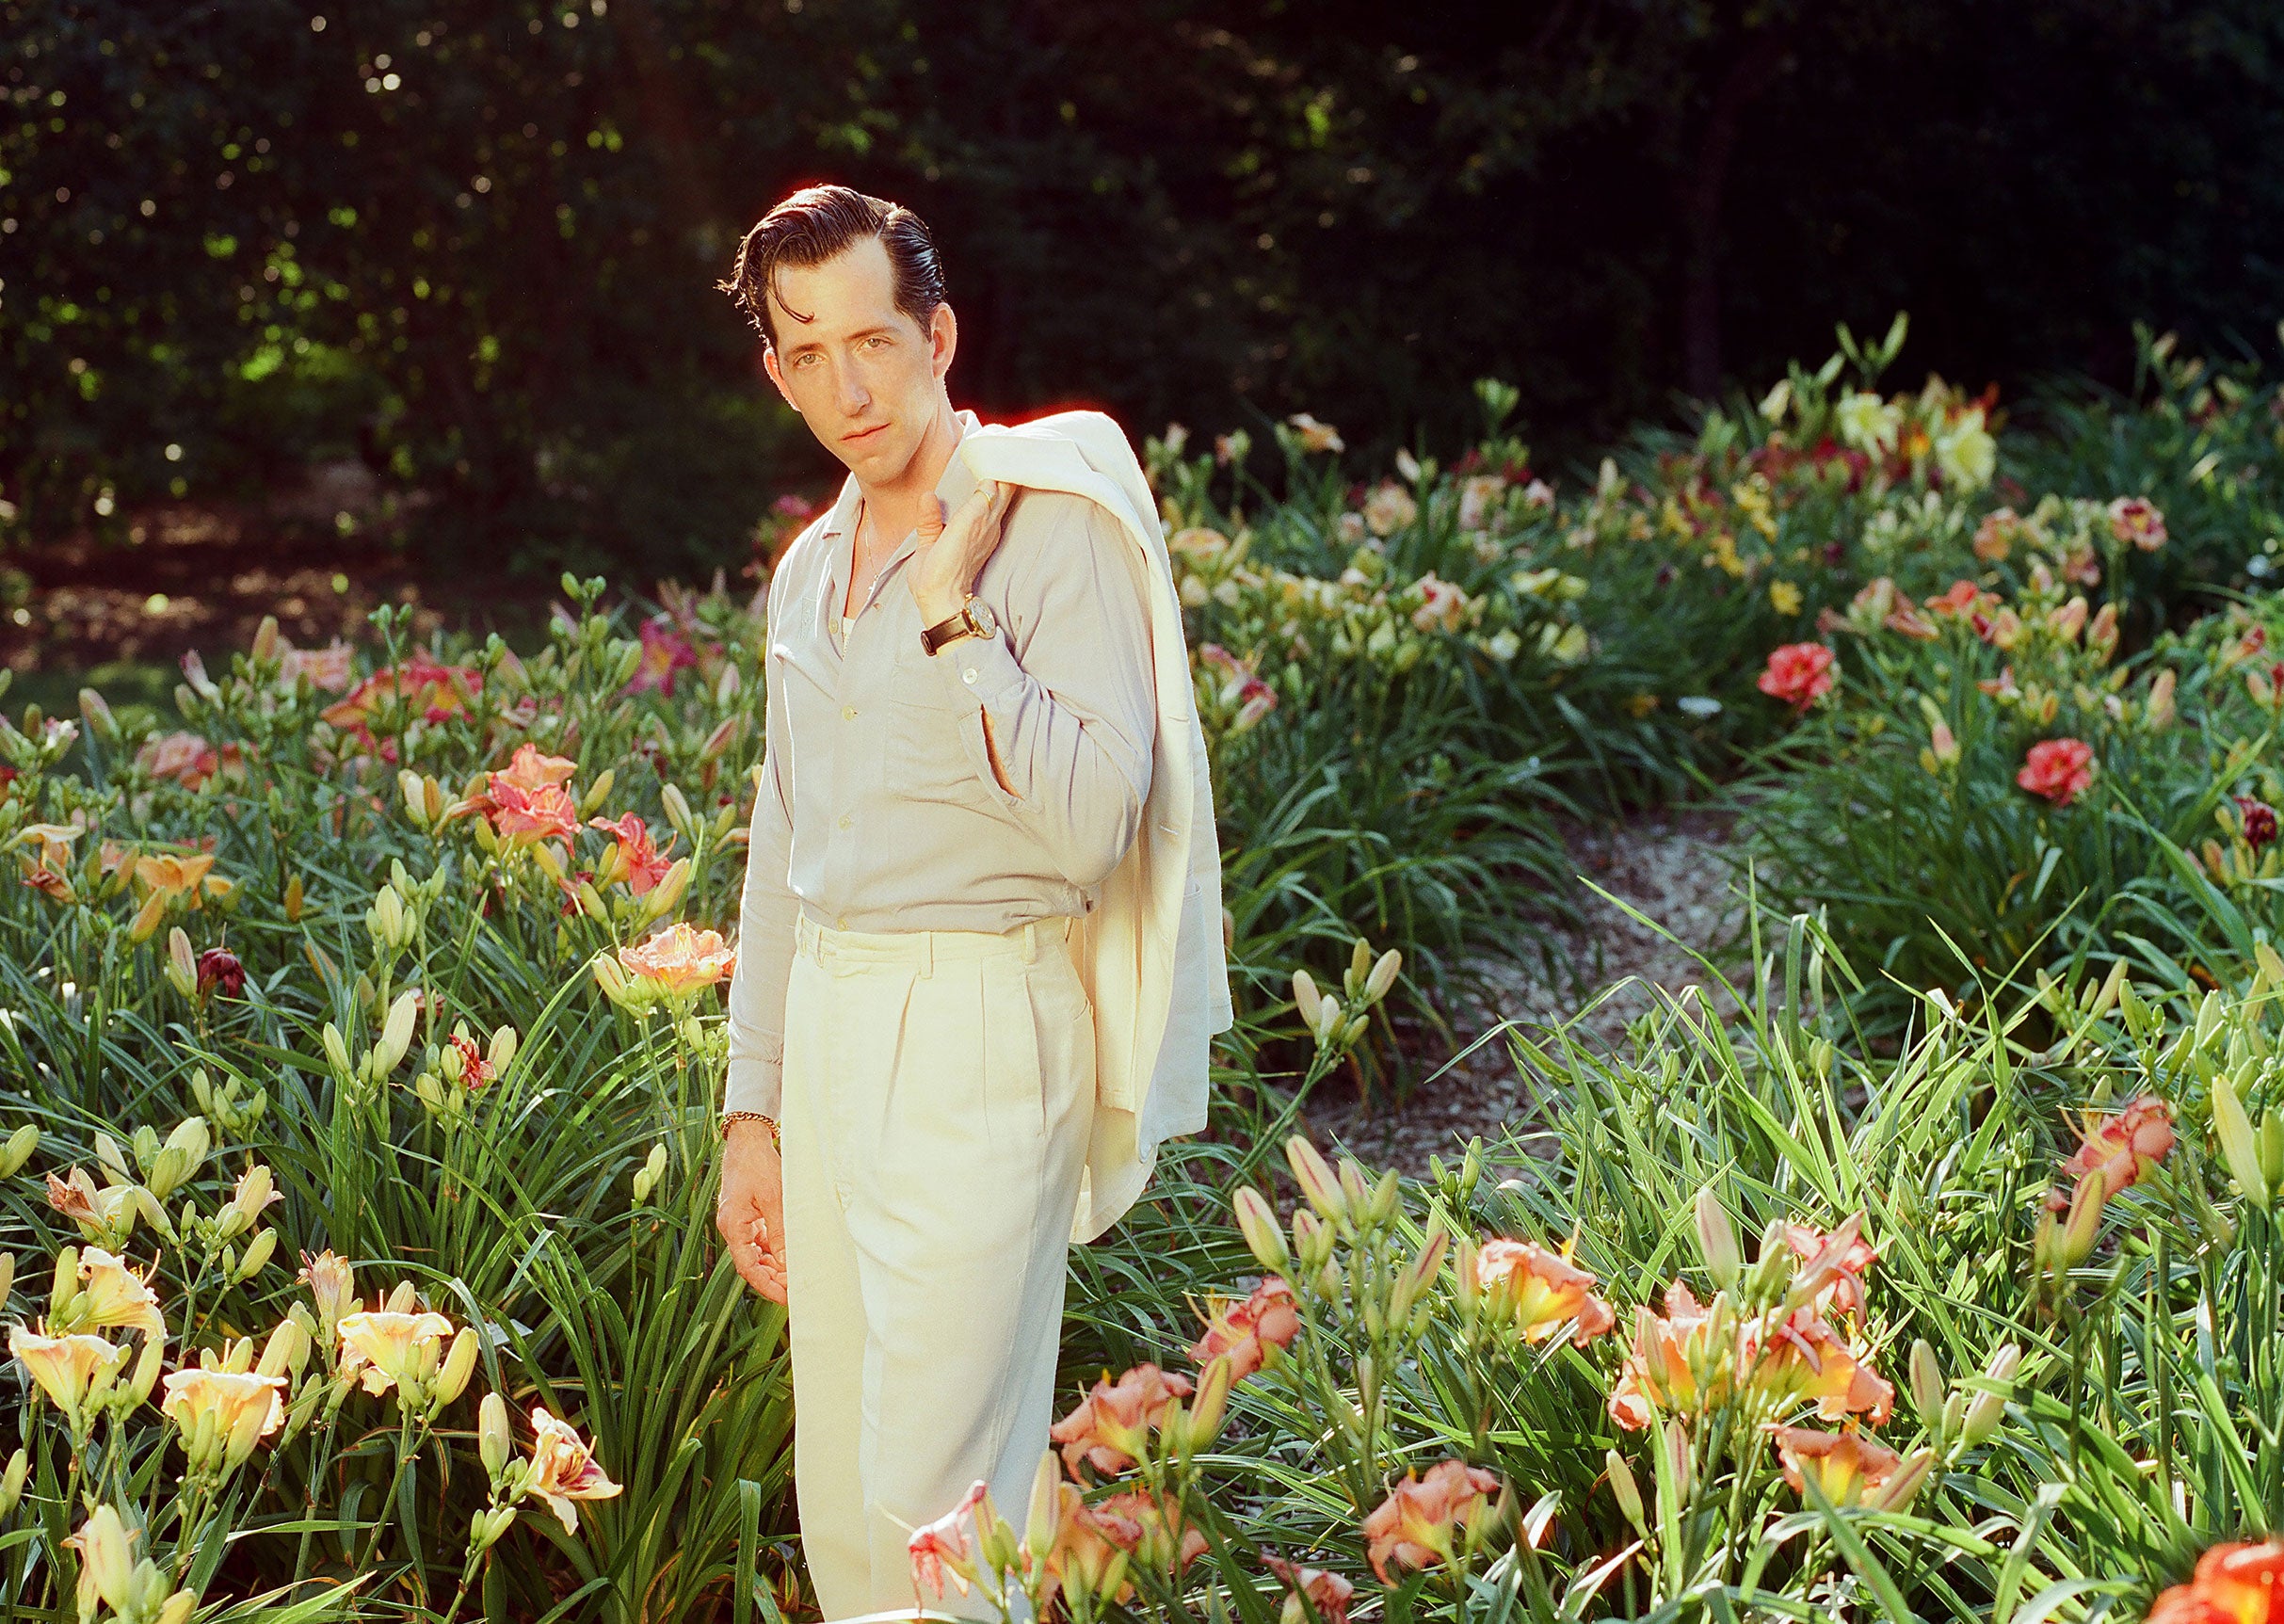 Pokey Lafarge At Rose Park in Columbia promo photo for VIP Package Onsale presale offer code